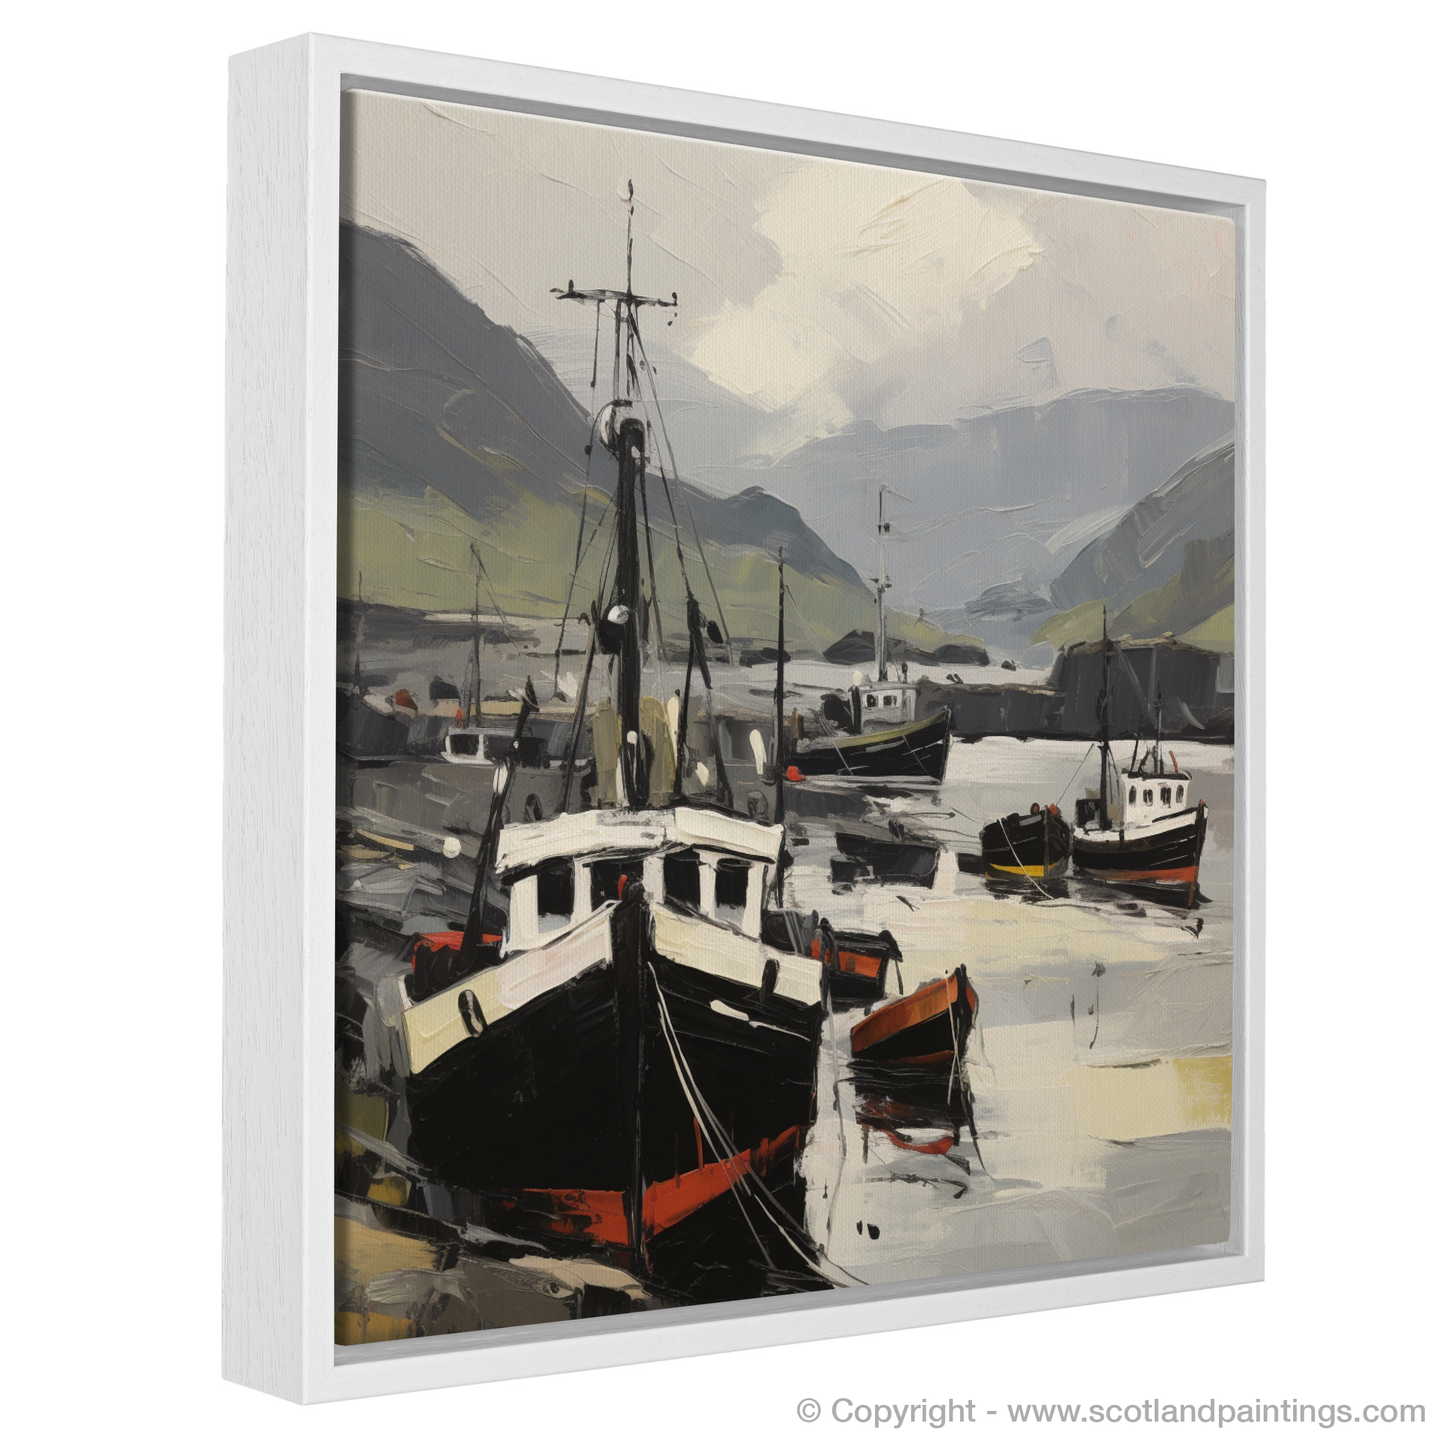 Painting and Art Print of Ullapool Harbour entitled "Ullapool Harbour: An Expressionist Ode to Maritime Scotland".